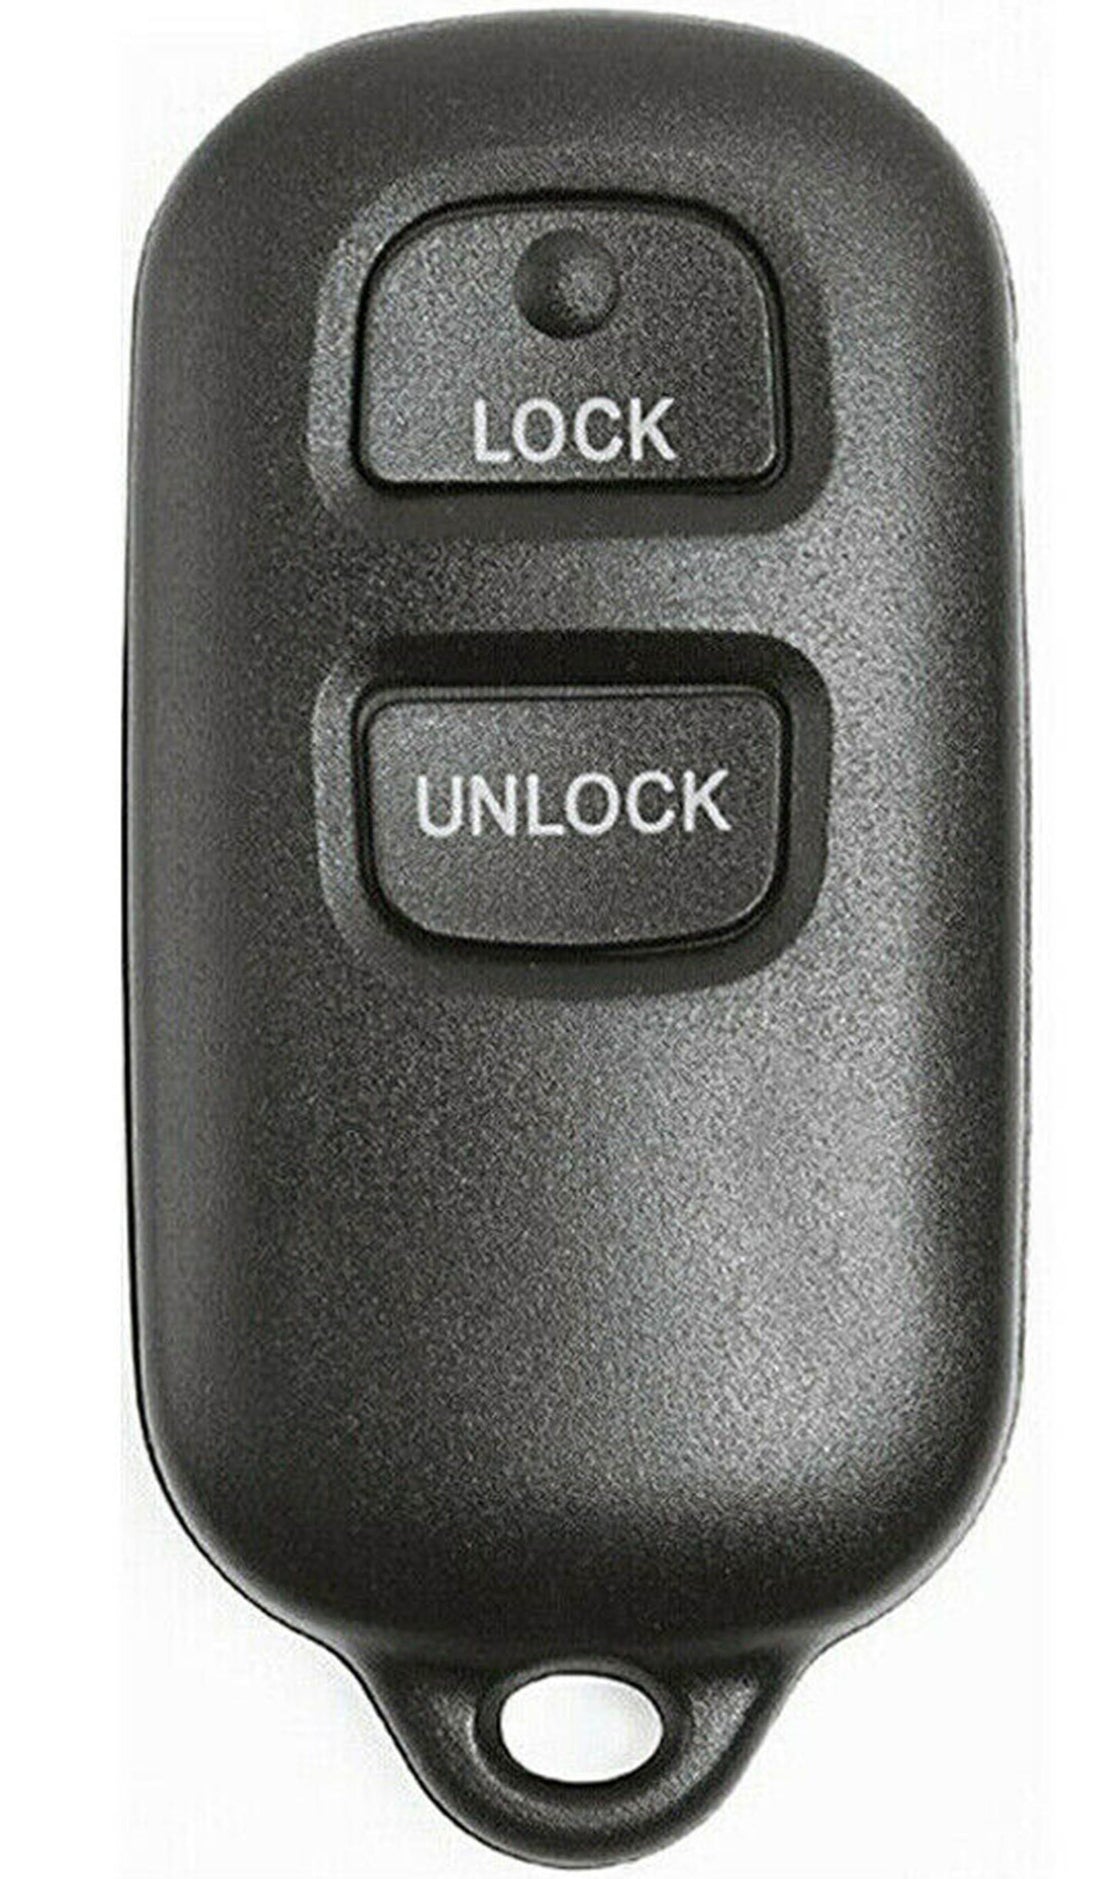 1x New Replacement Keyless Entry Remote Key Fob Compatible with and Fit for Toyota & Pontiac - MPN GQ43VT14T